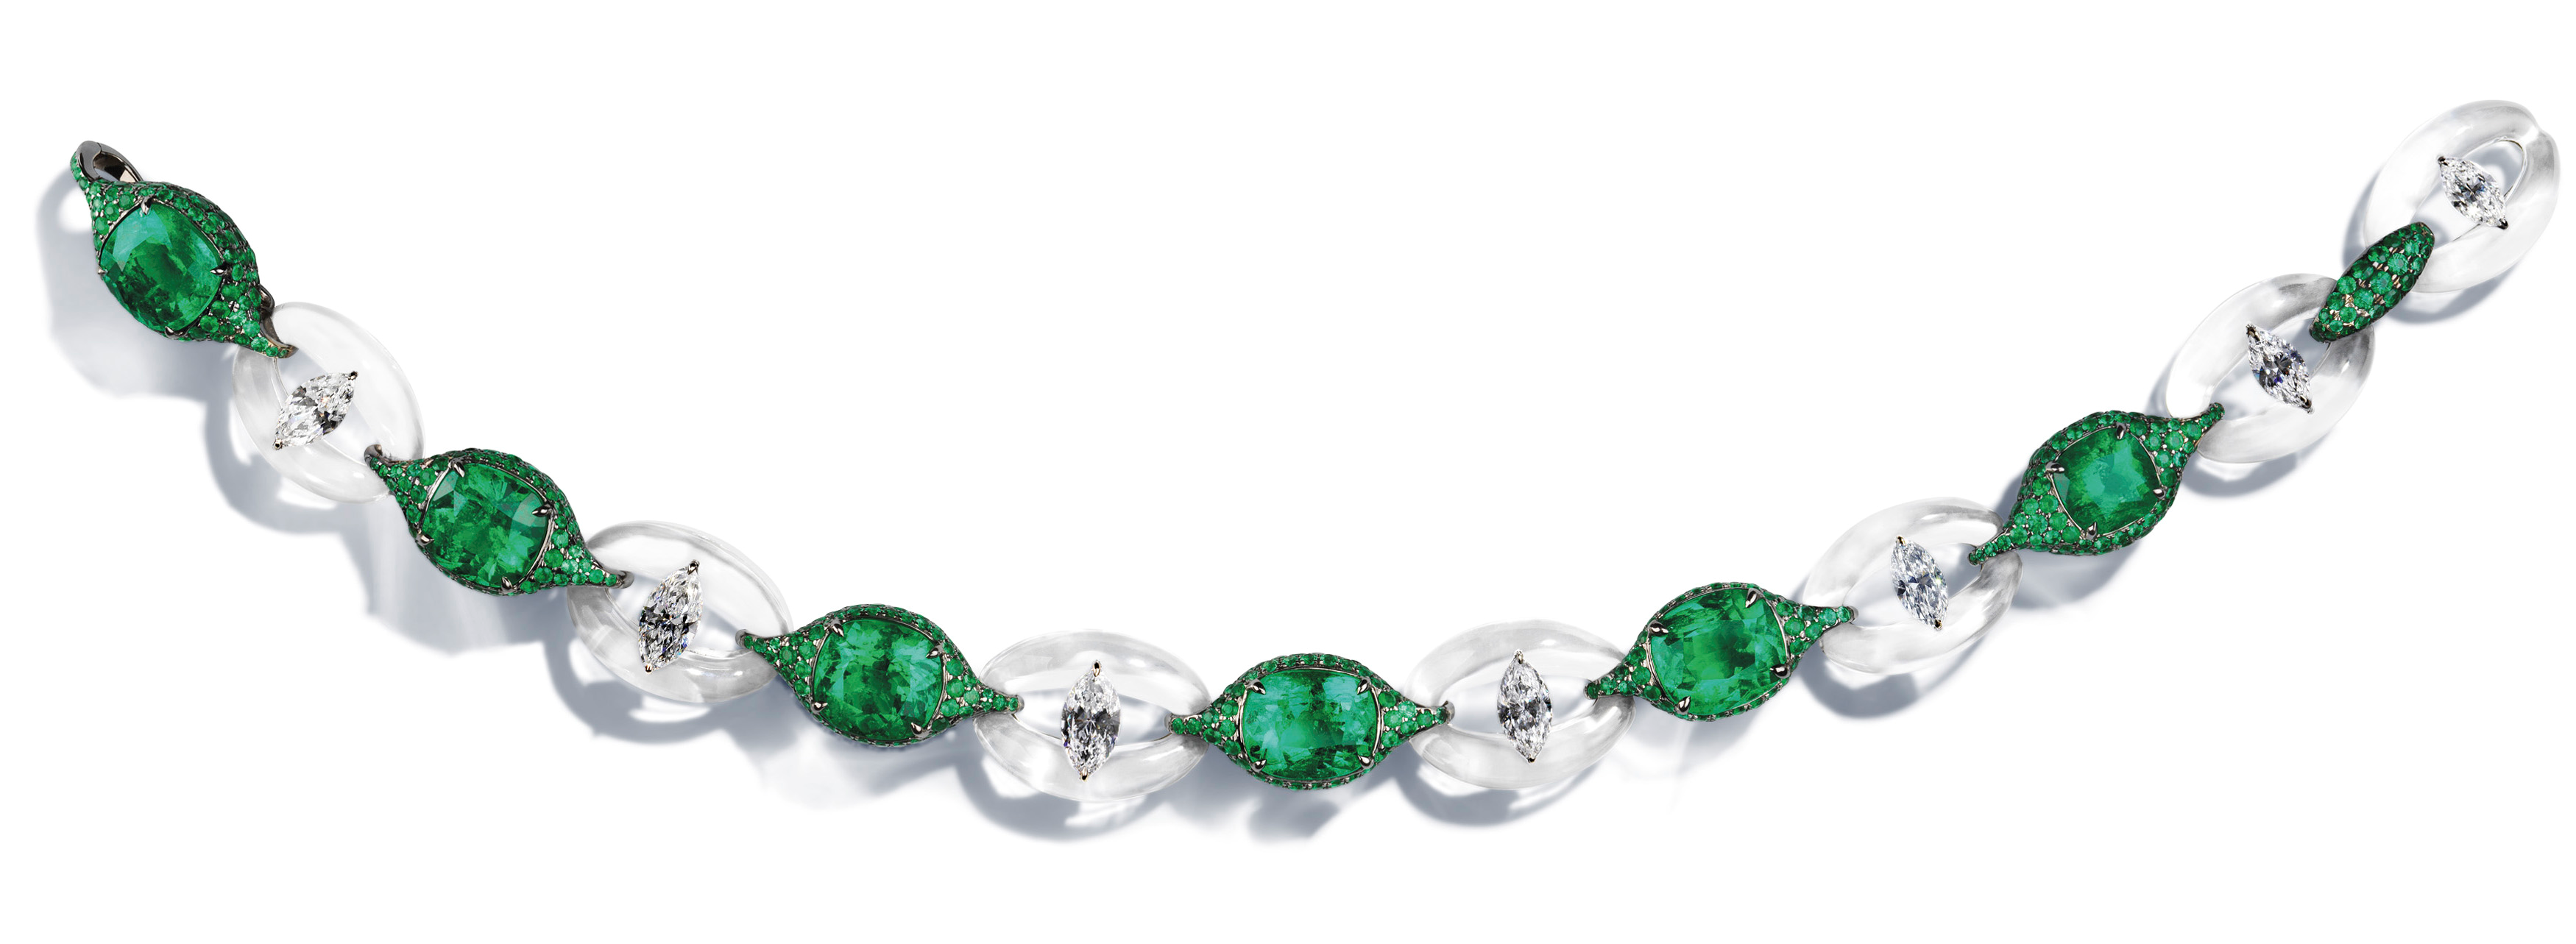 Chopard. This 18ct white gold bracelet is set with six cushion-shaped cushions emeralds, diamonds and quartz. Price on request